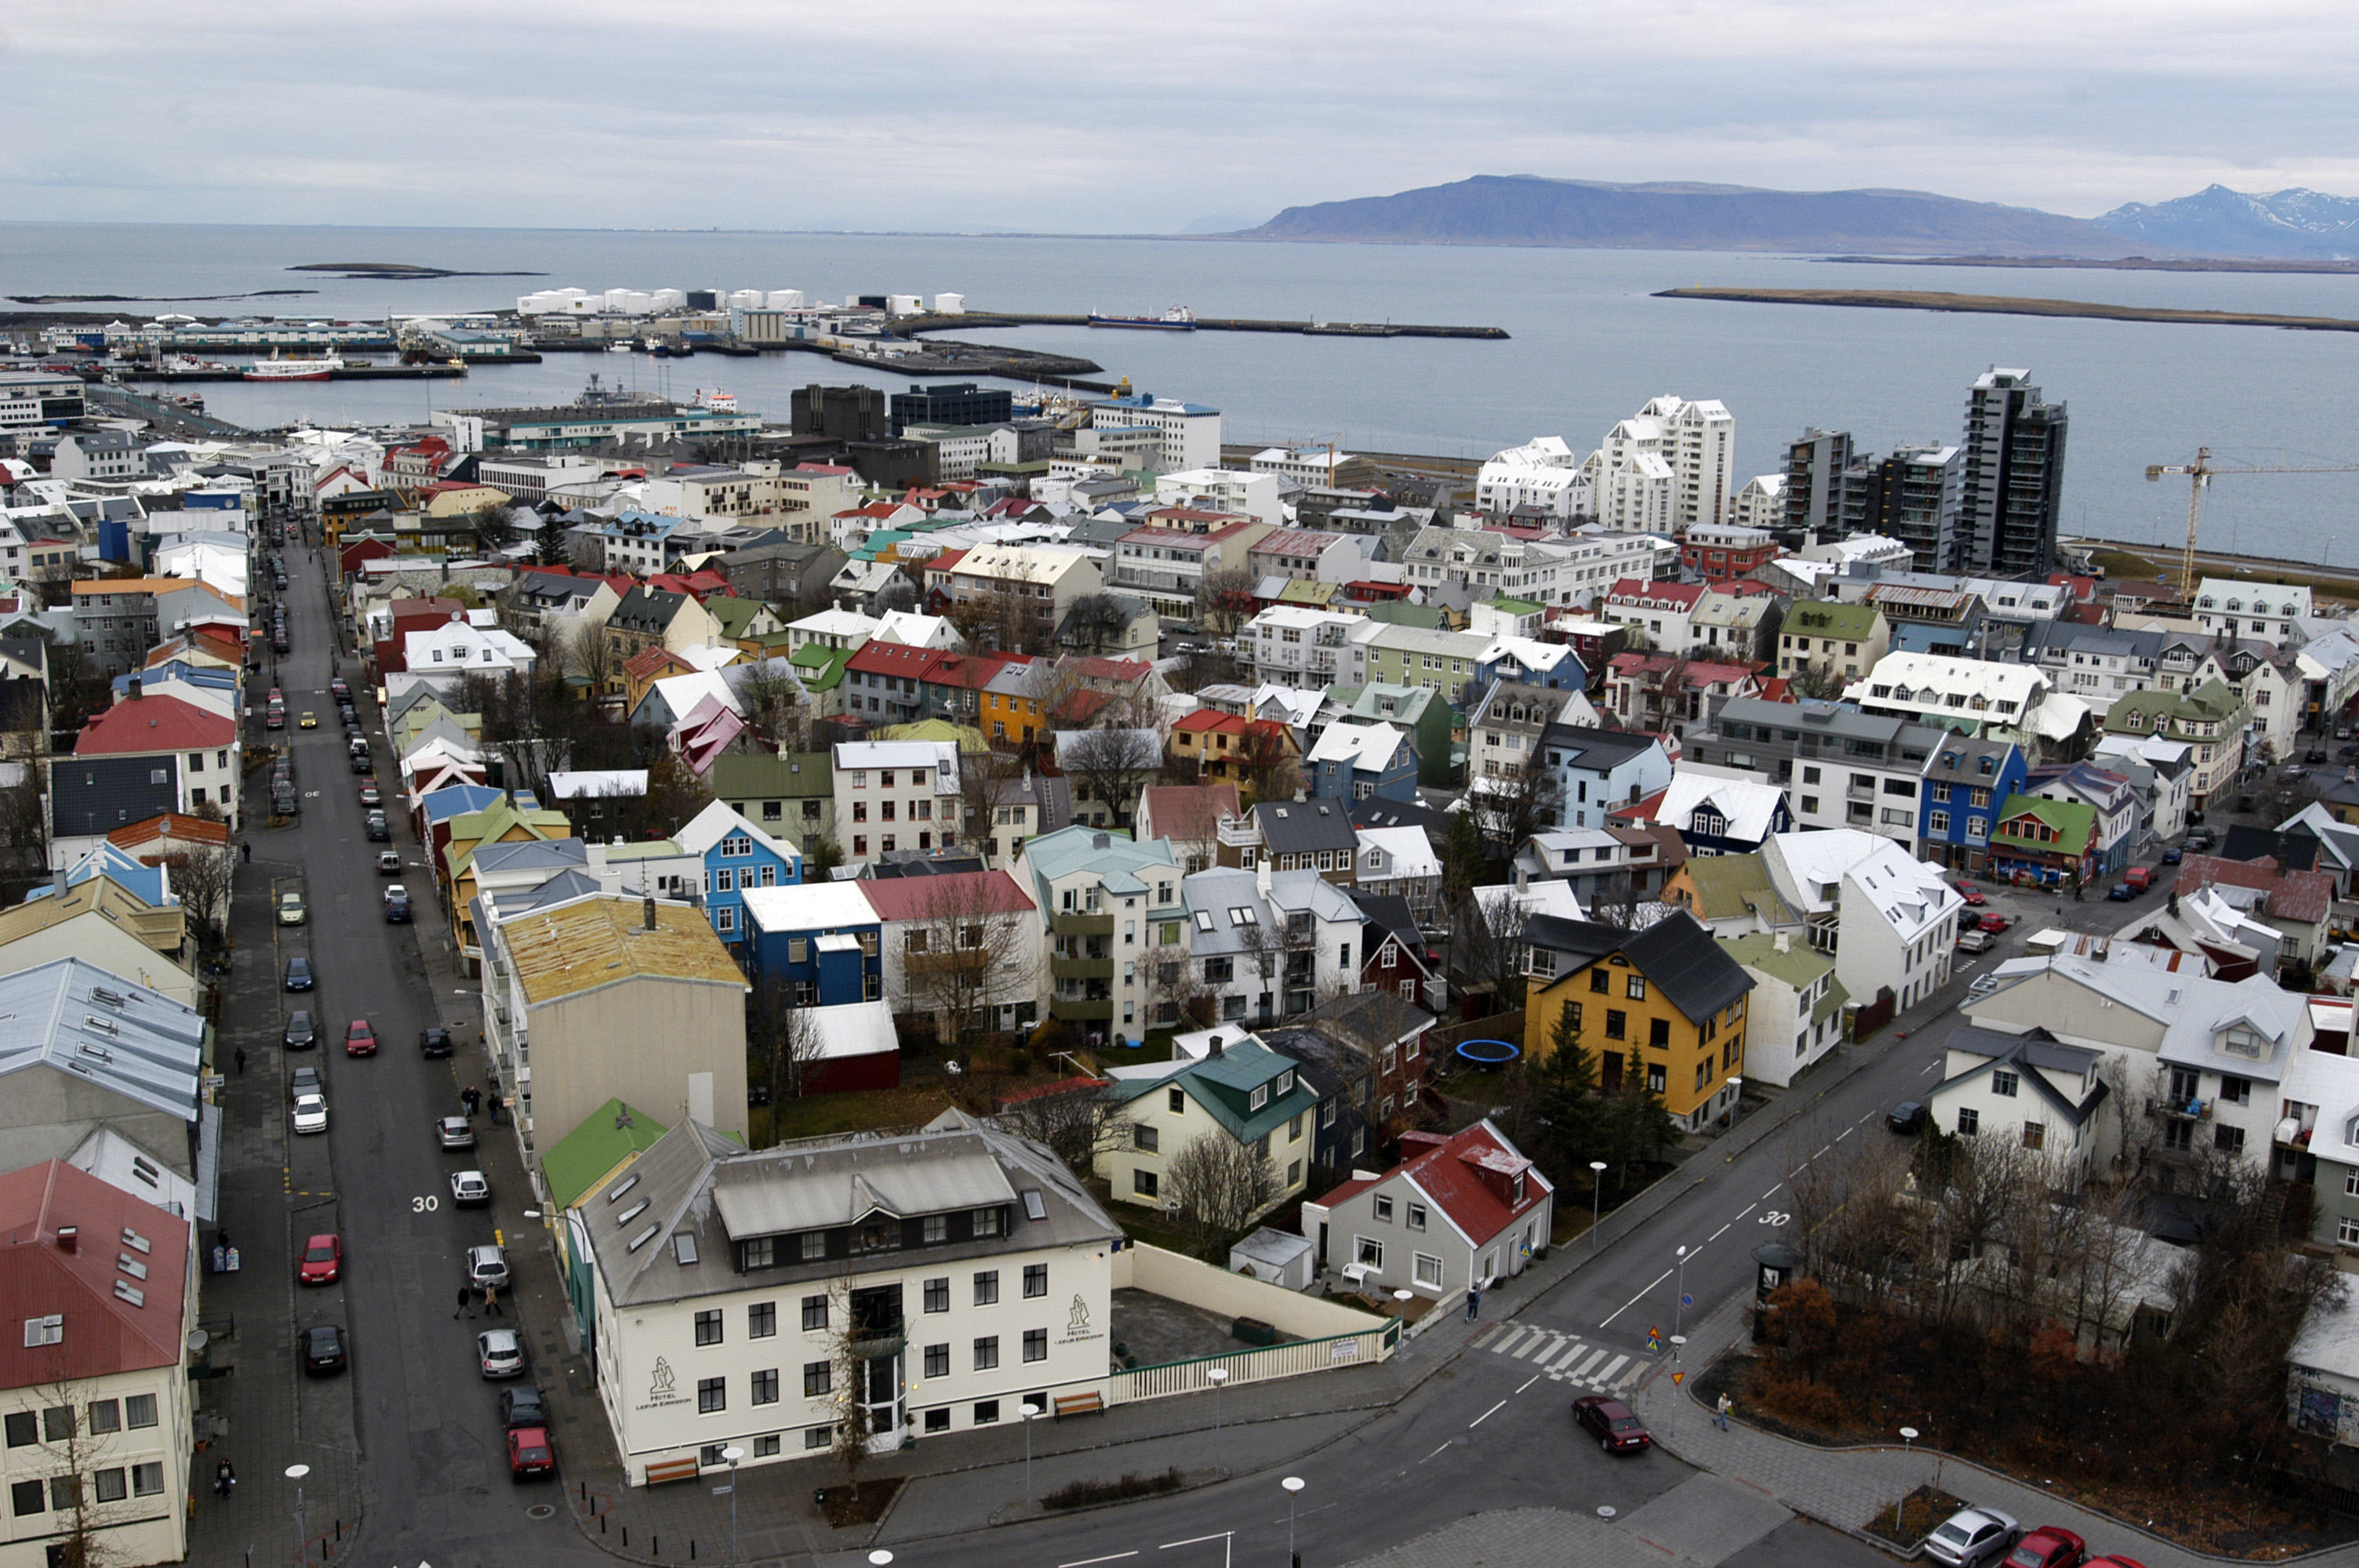 A view of Reykjavik